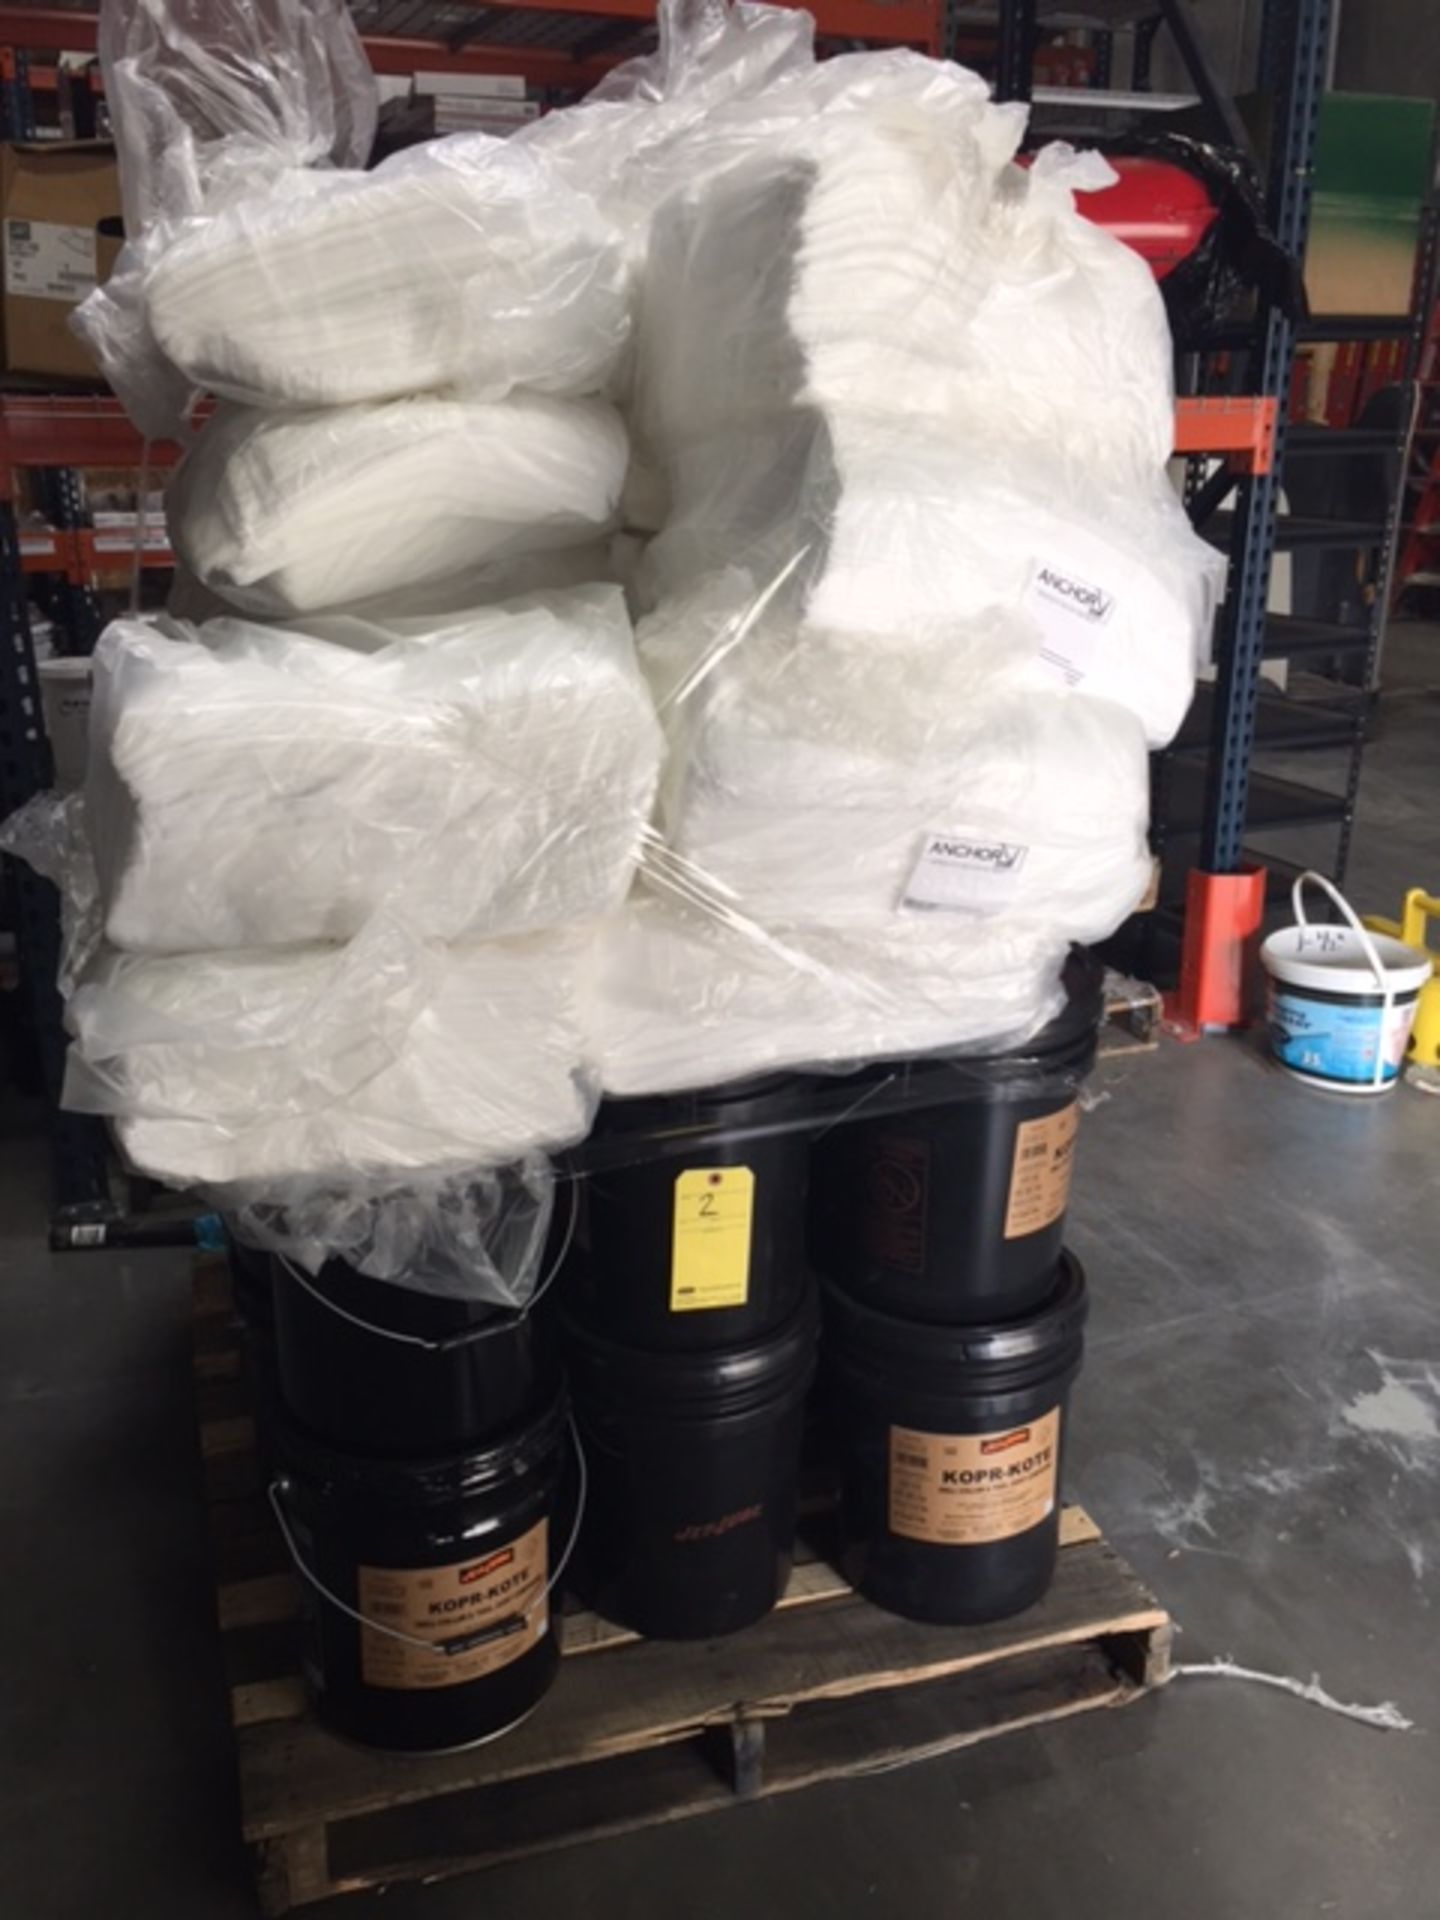 LOT OF KOPR-KOTE PIPE DOPE & ABSORBENT PADS  LOCATED IN HOUSTON, TX